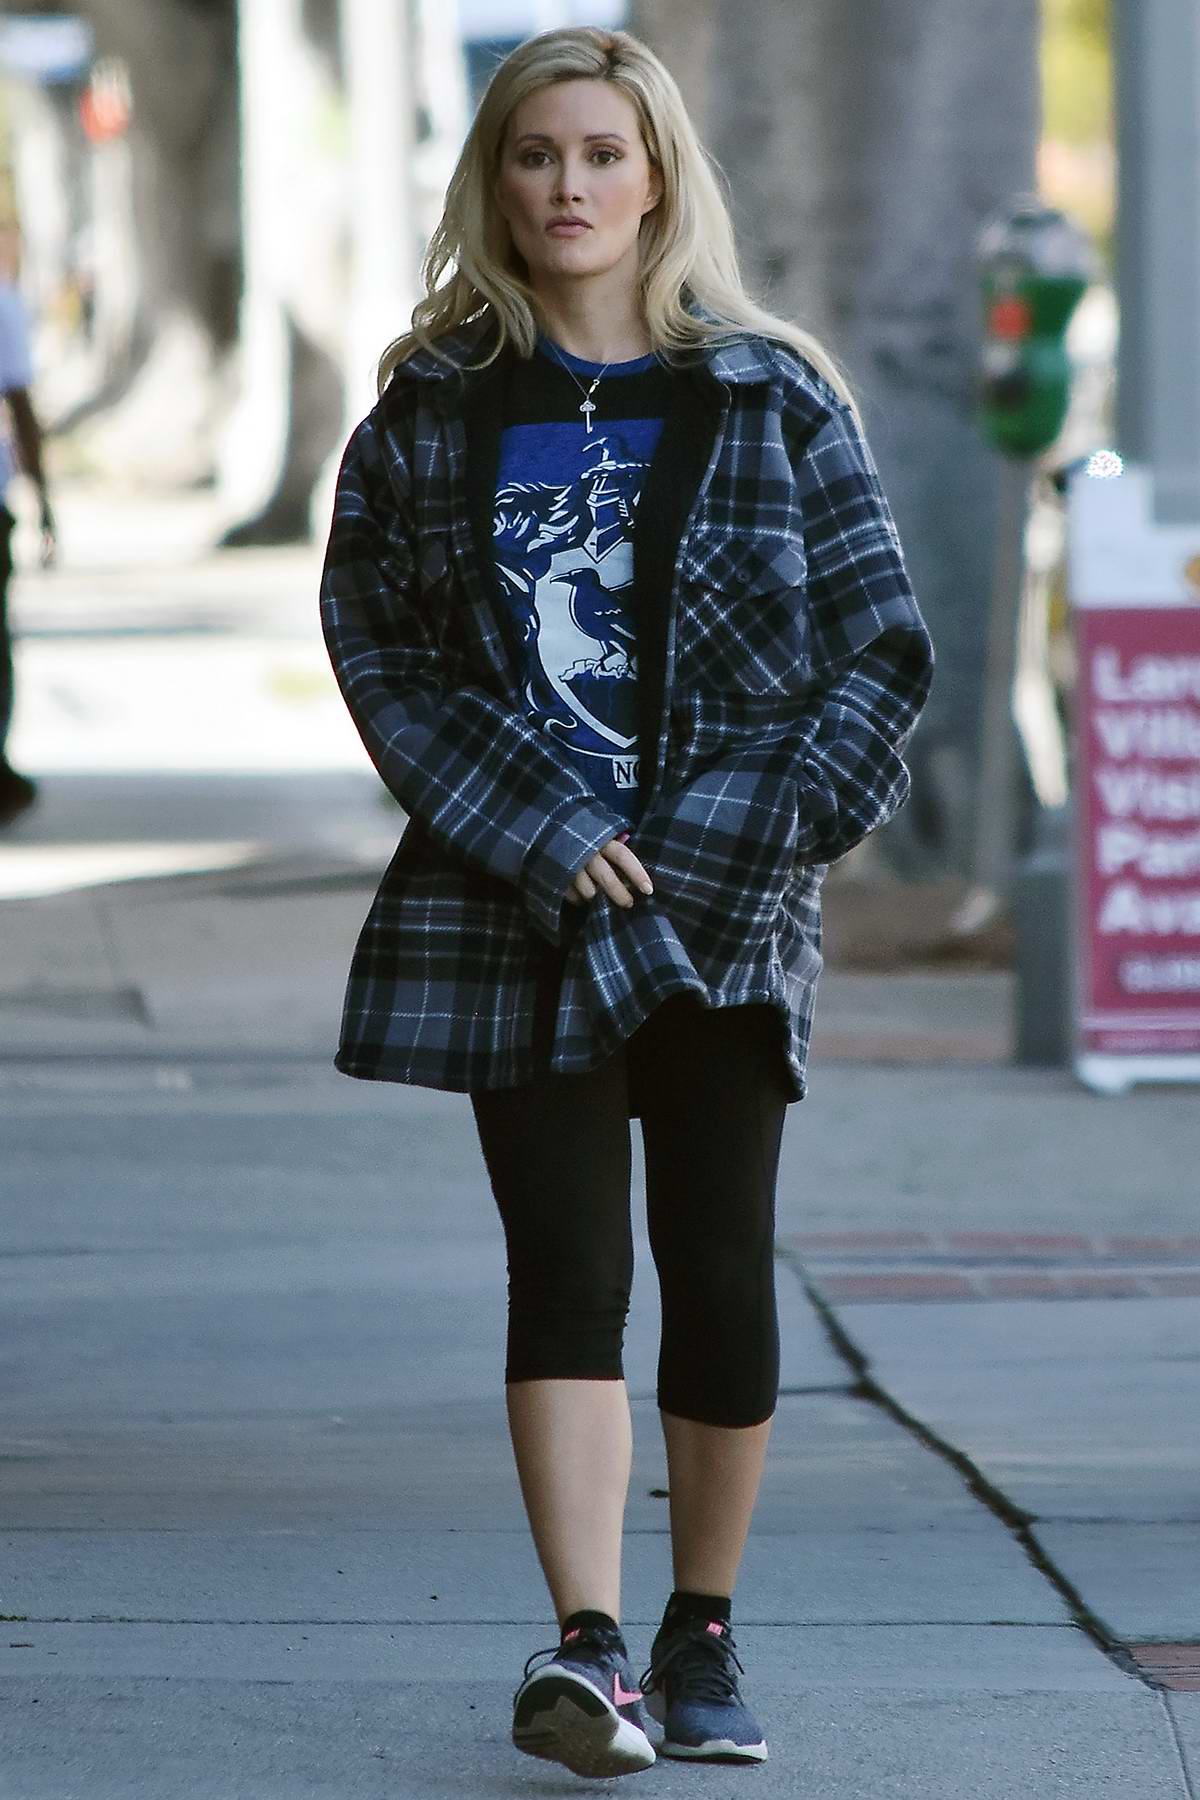 Holly Madison wears a checkered flannel shirt and leggings while